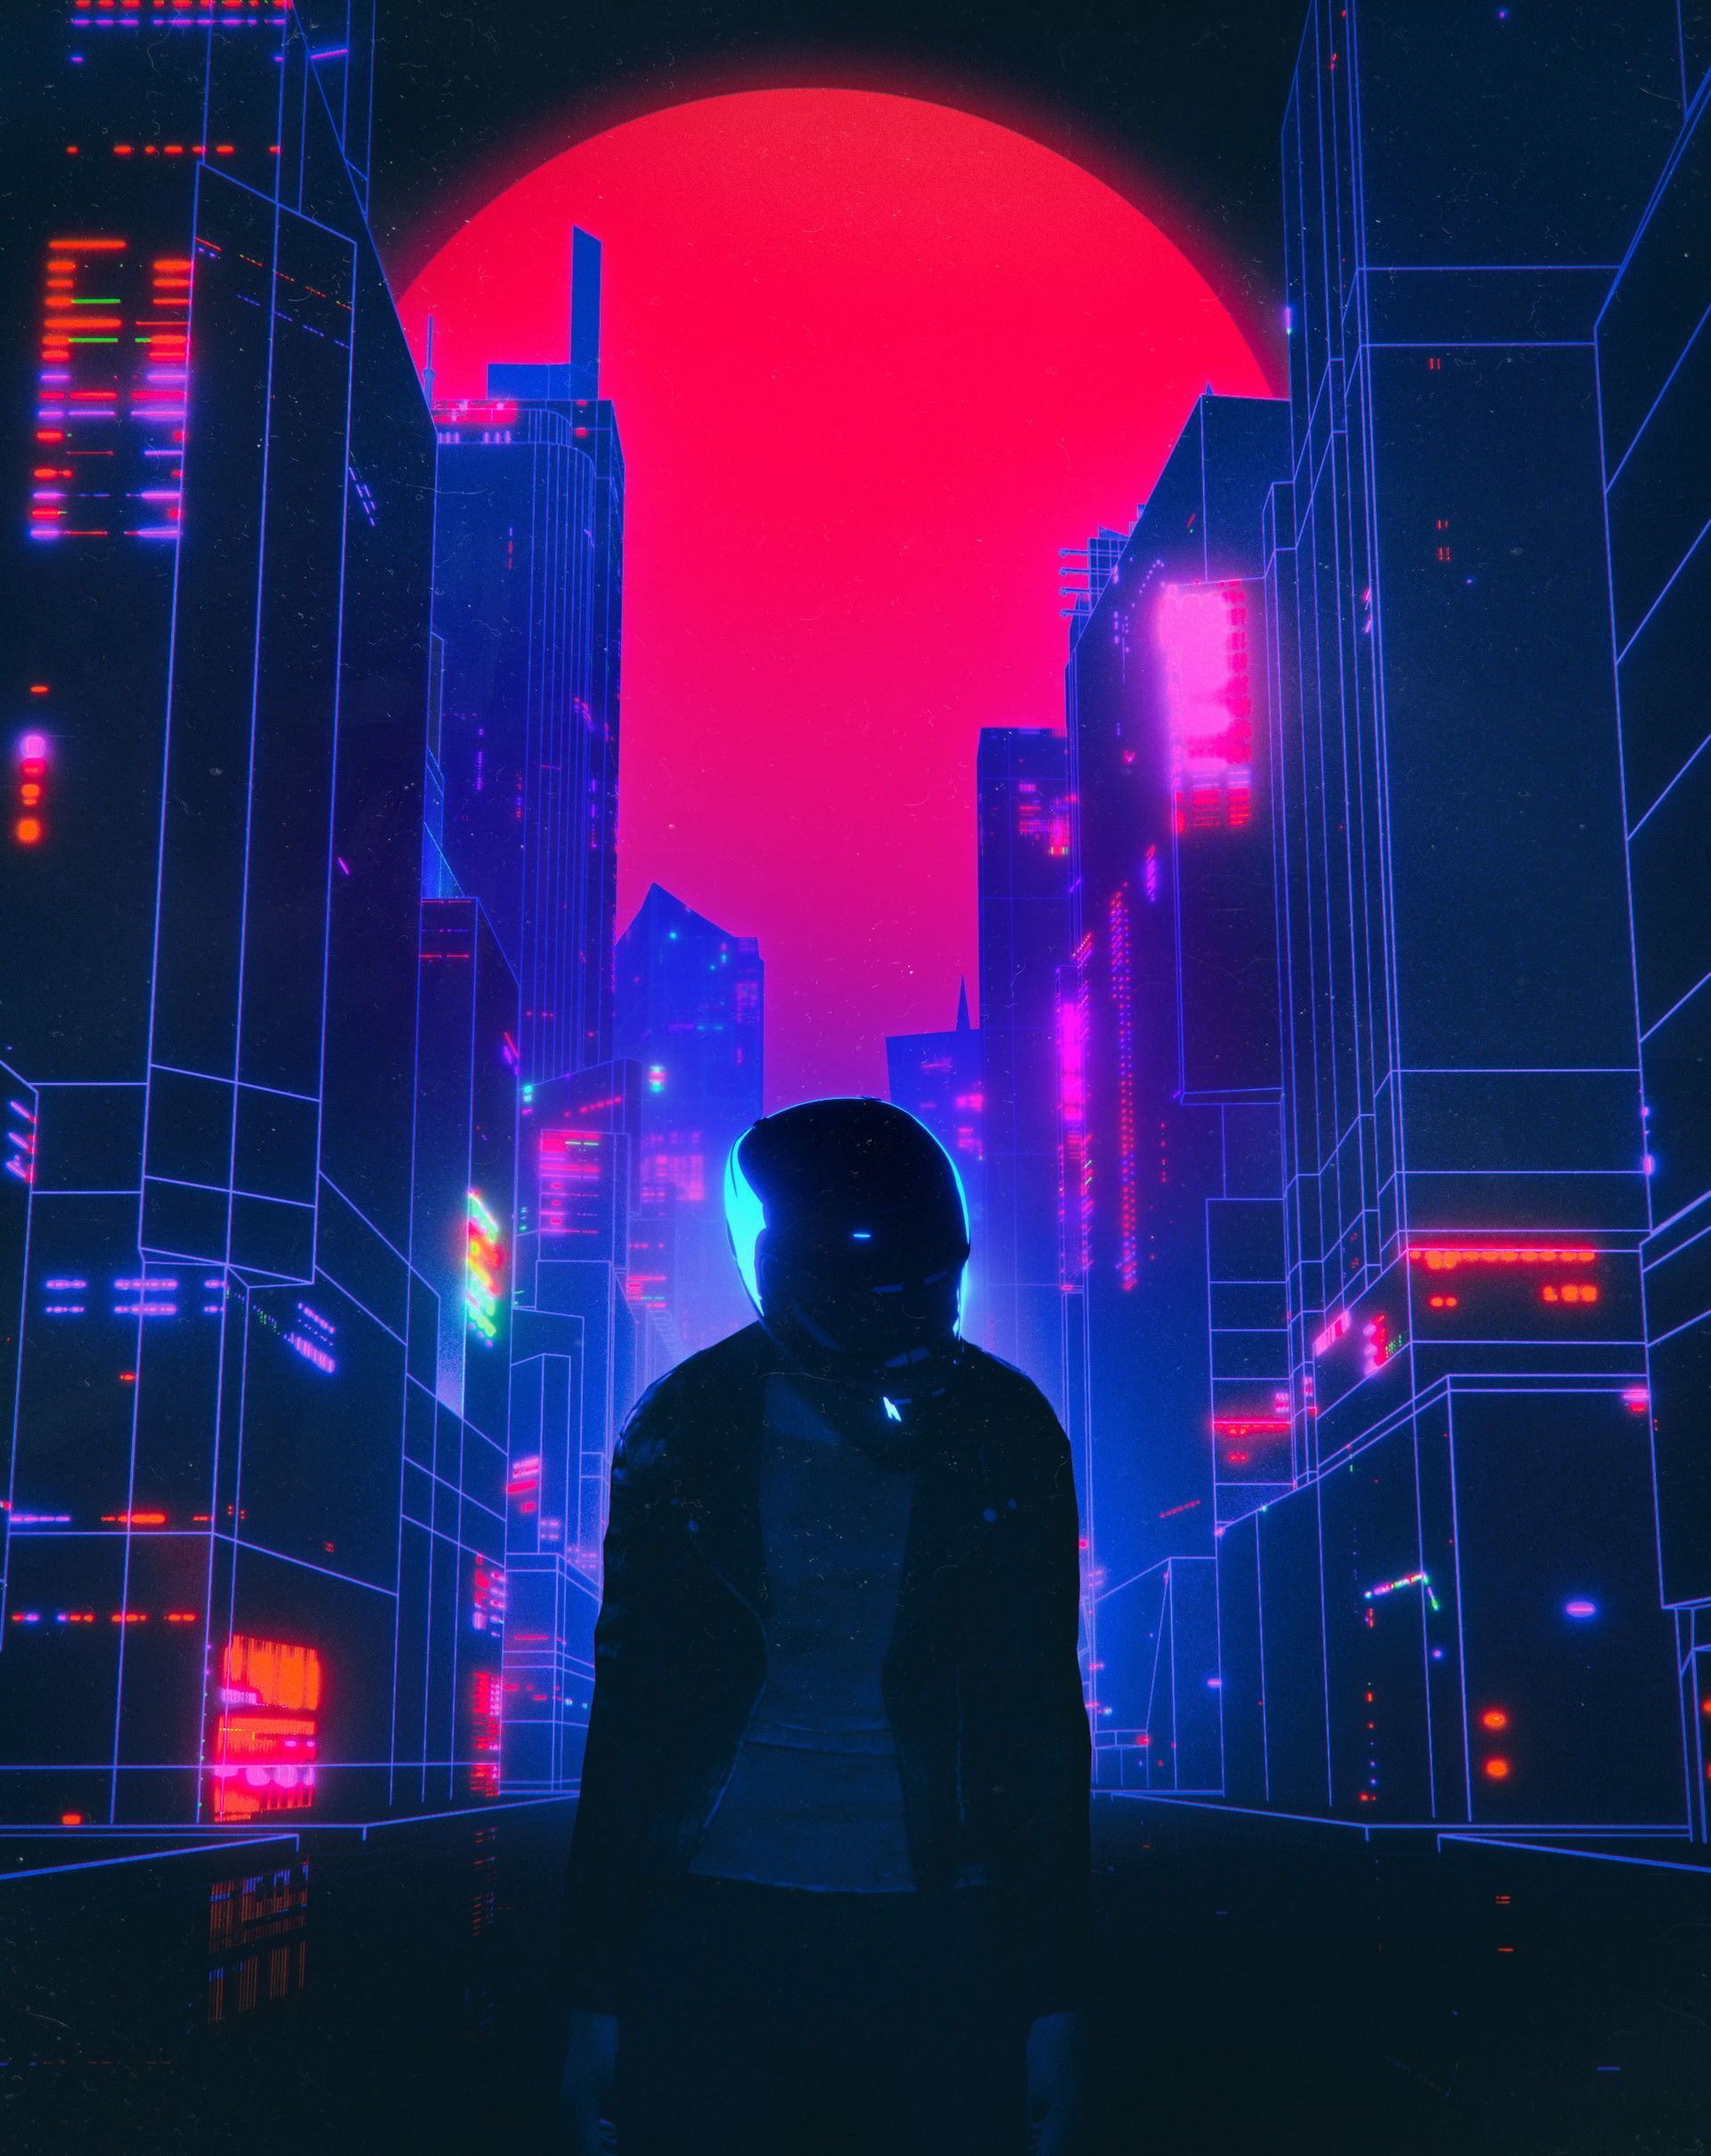 cyberpunk aesthetic 4k wallpapers Wallpapers Wallpapers - Most Popular ...